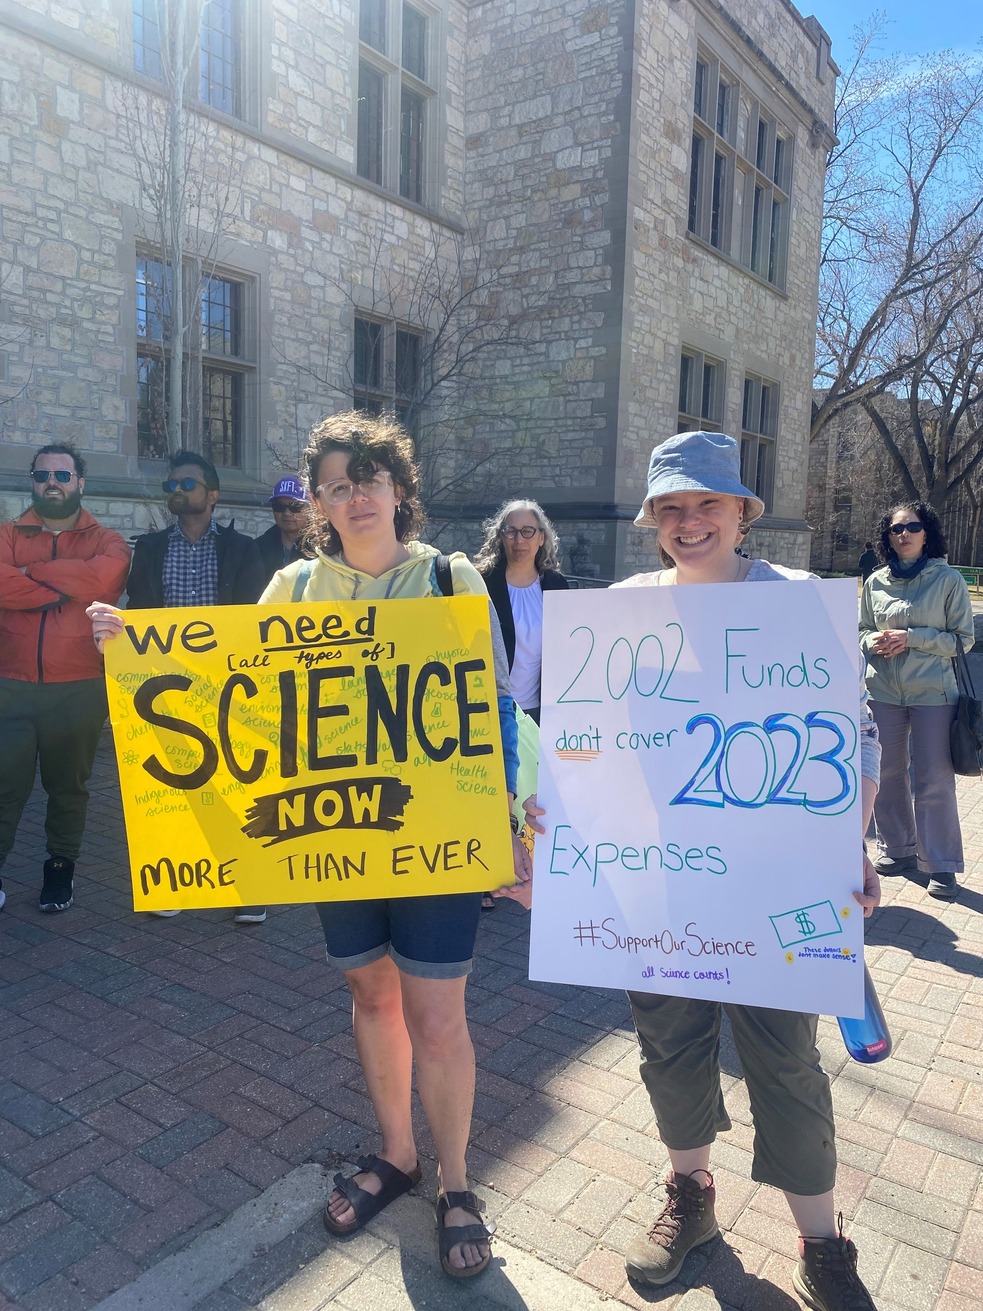 Pictured: Two USask graduate students holding protest signs at the May 1st, 2023 Support Our Science walk-out demonstration